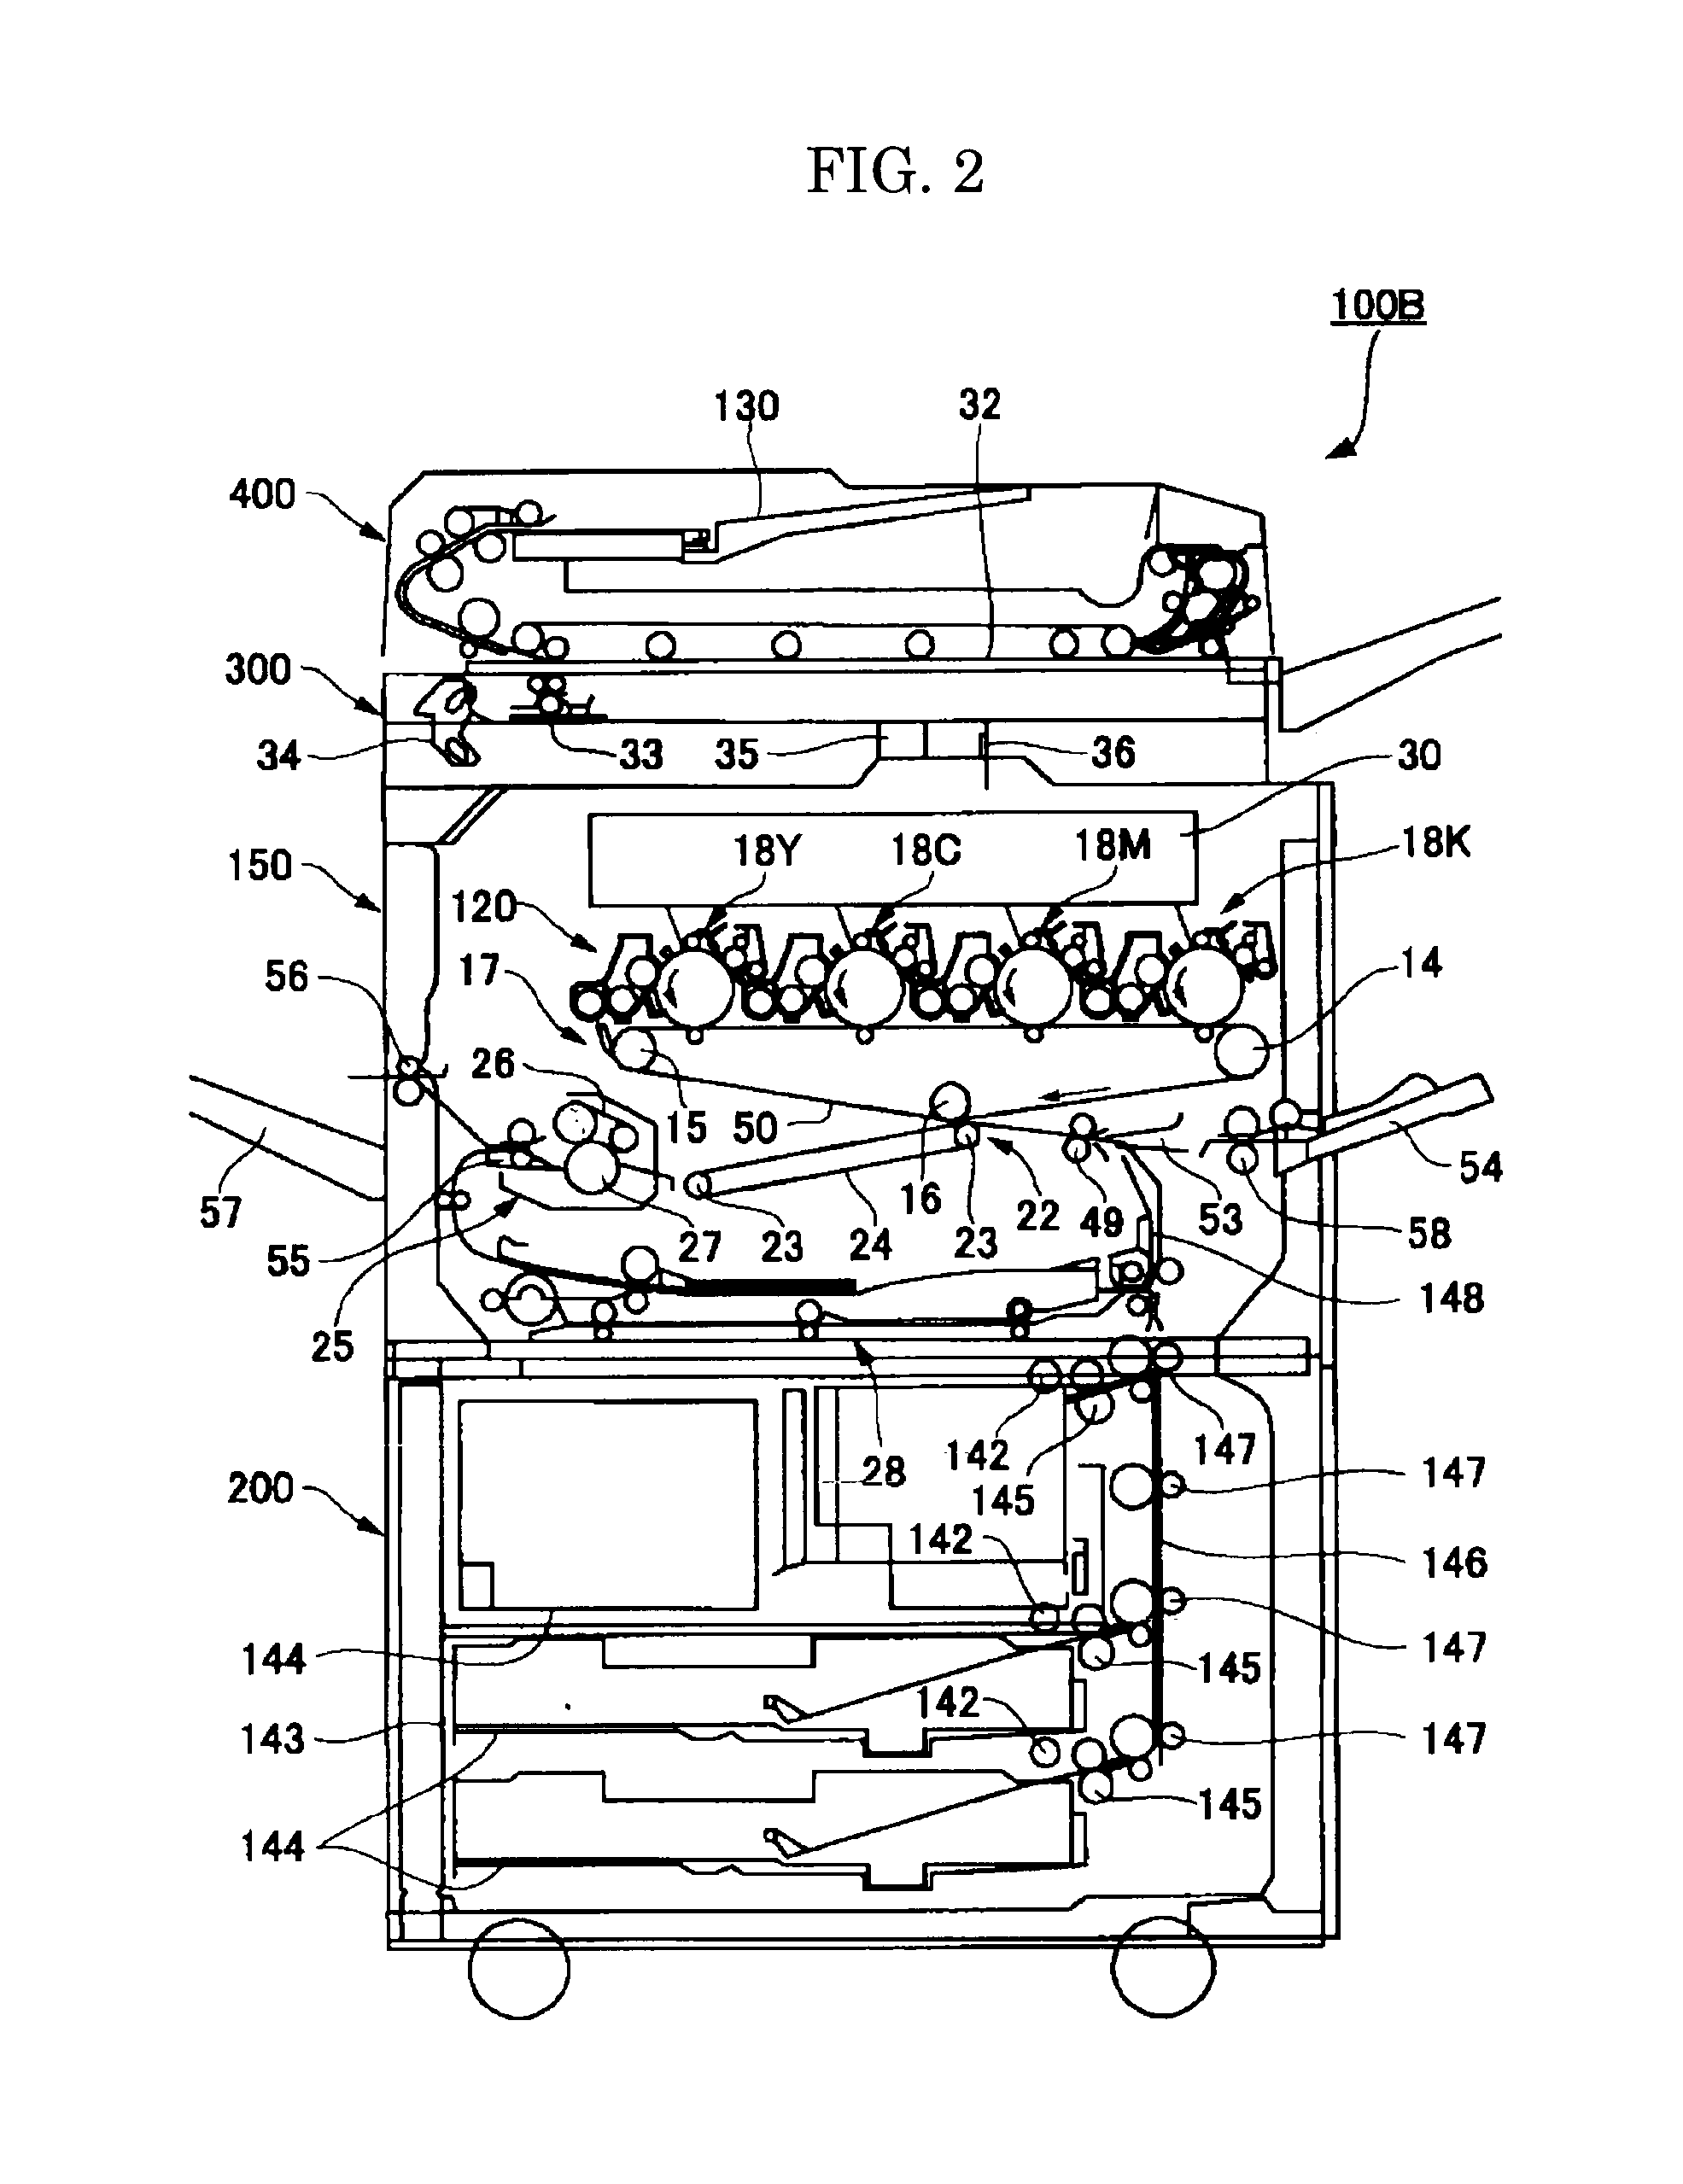 Toner, developer, image forming method and image forming apparatus